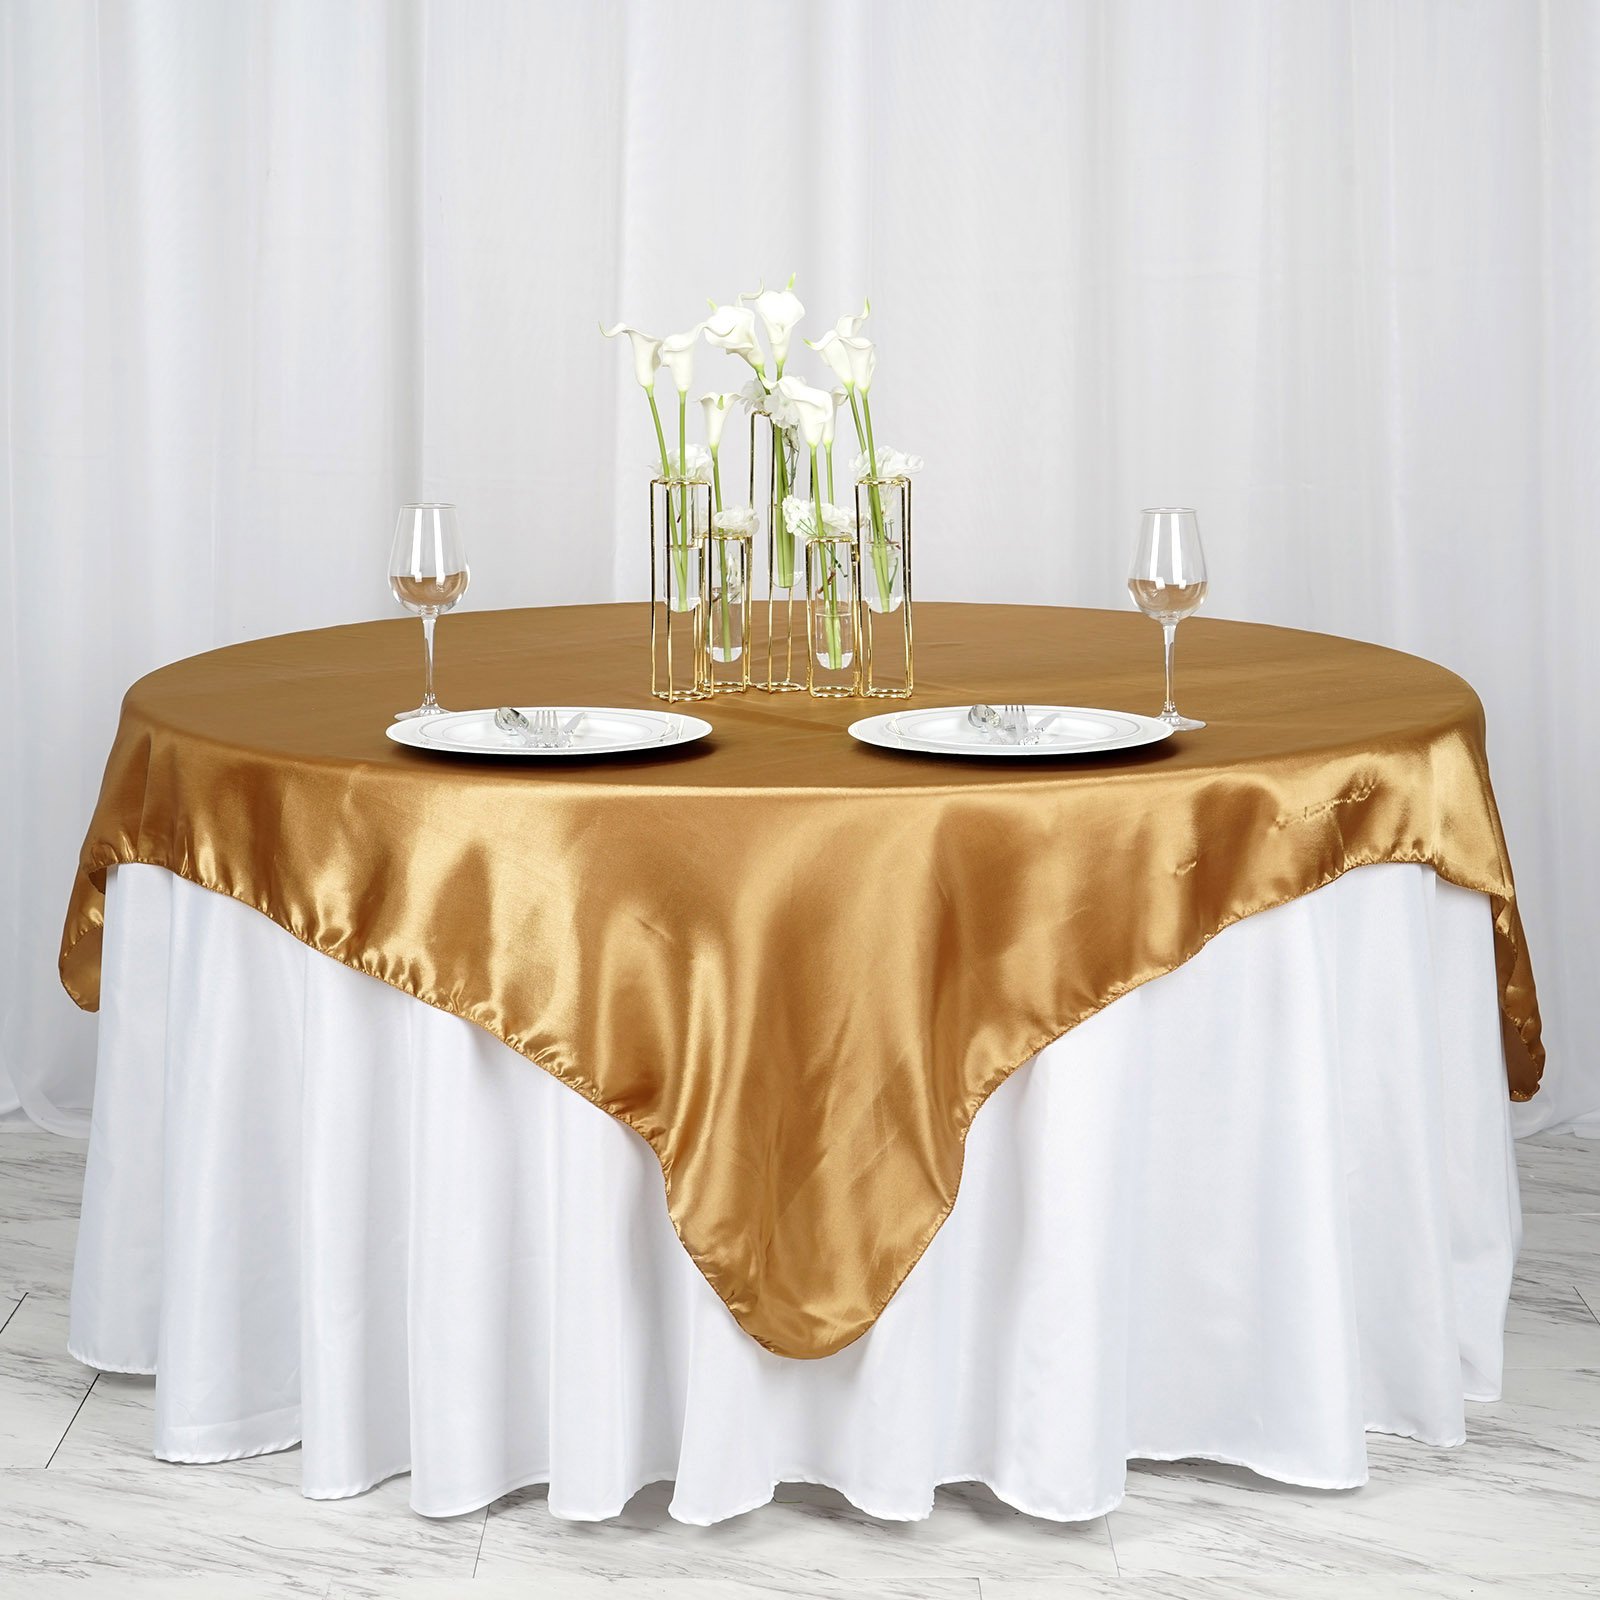 Efavormart 5pcs 72 Satin Square Tablecloth Overlay for Wedding Catering Party Table Decorations Silver Square Tablecloth Cover